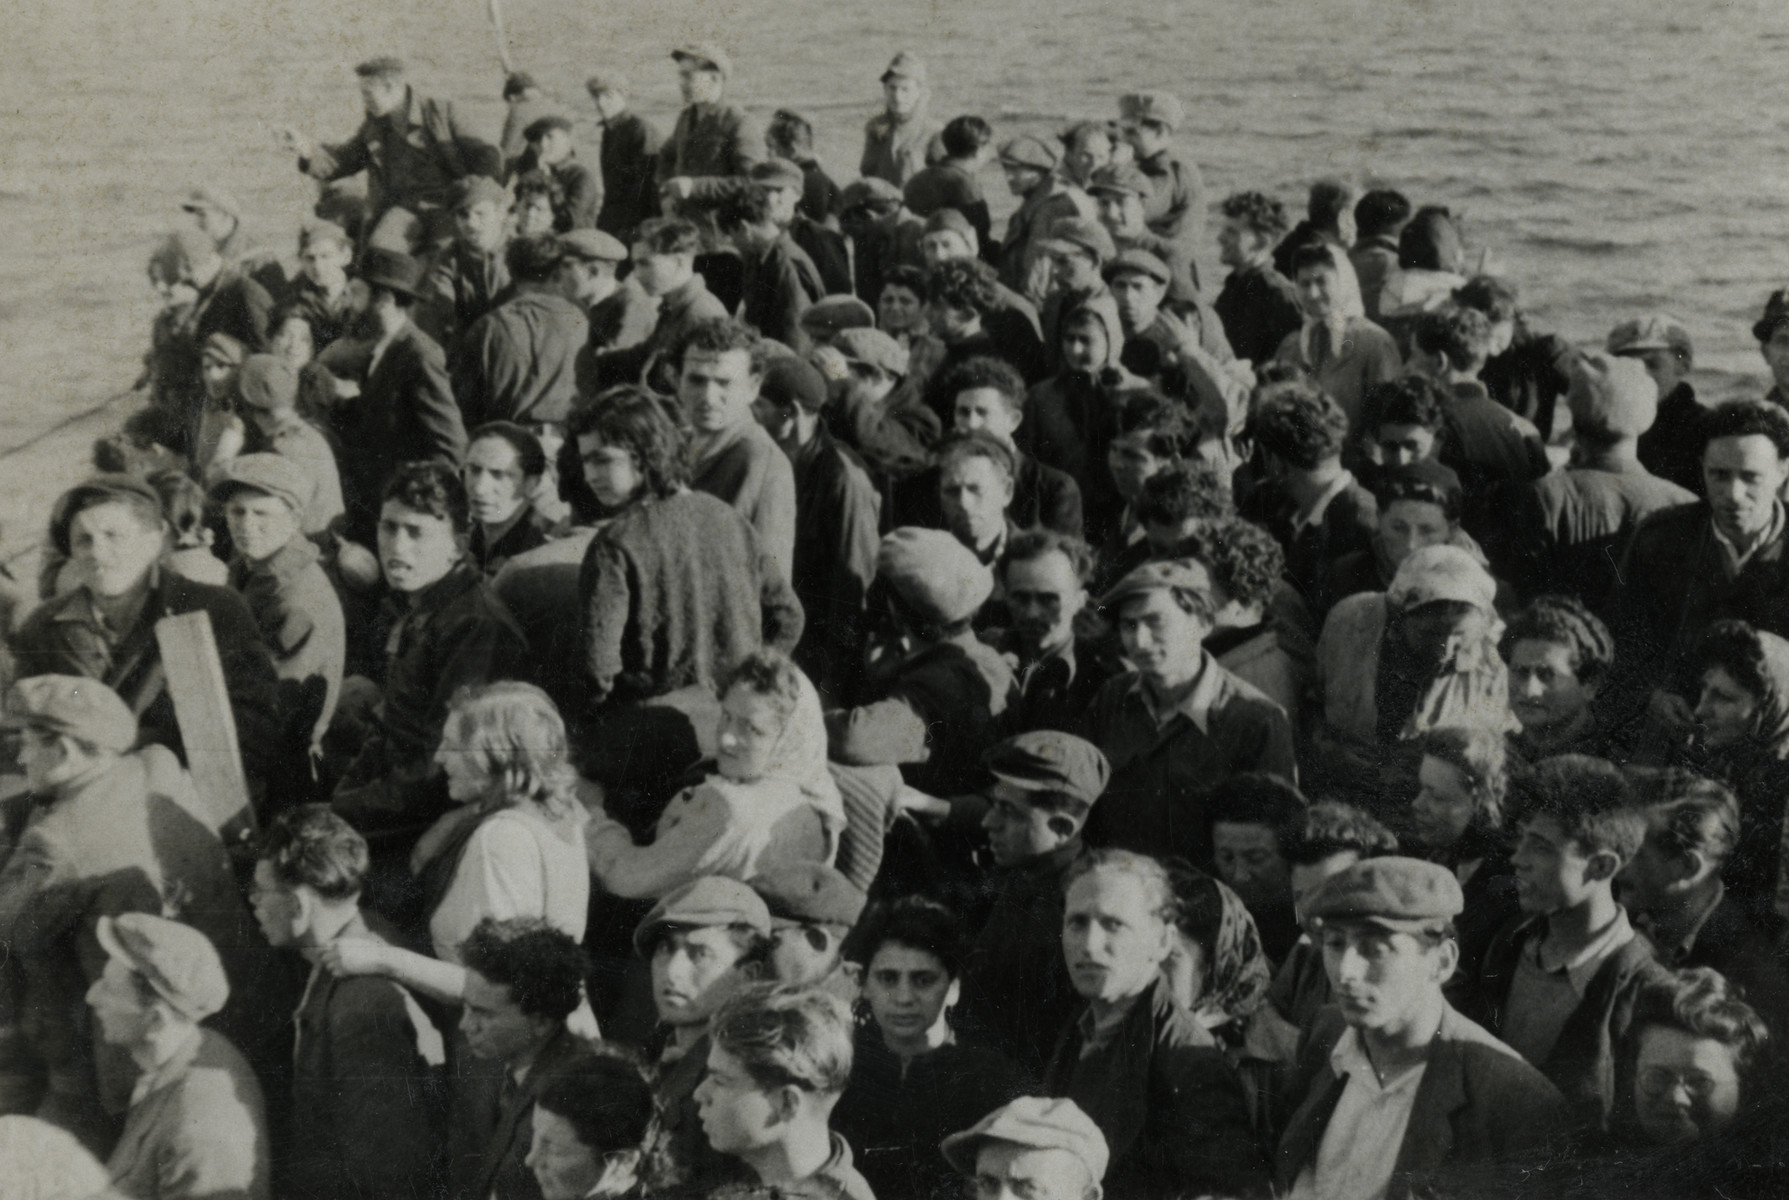 Illegal immigrants crowd together on the deck of the ship, Hatikvah.